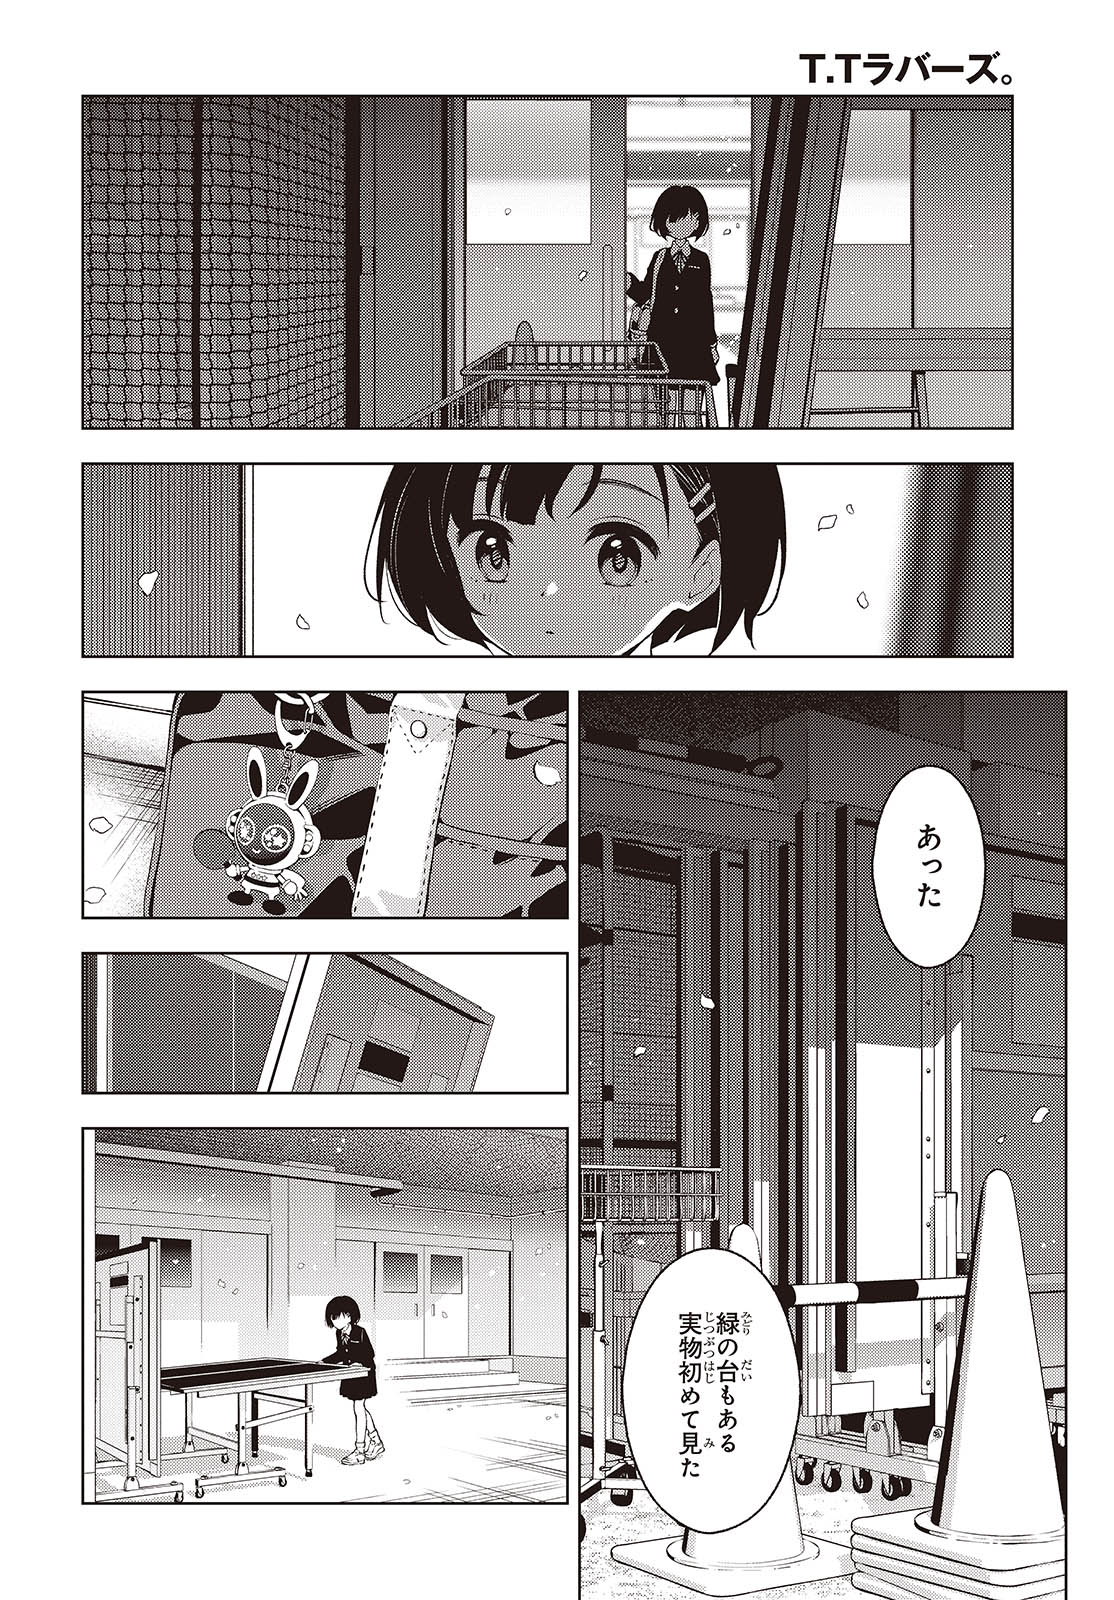 Ｔ．Ｔラバーズ。 第1話 - Page 18